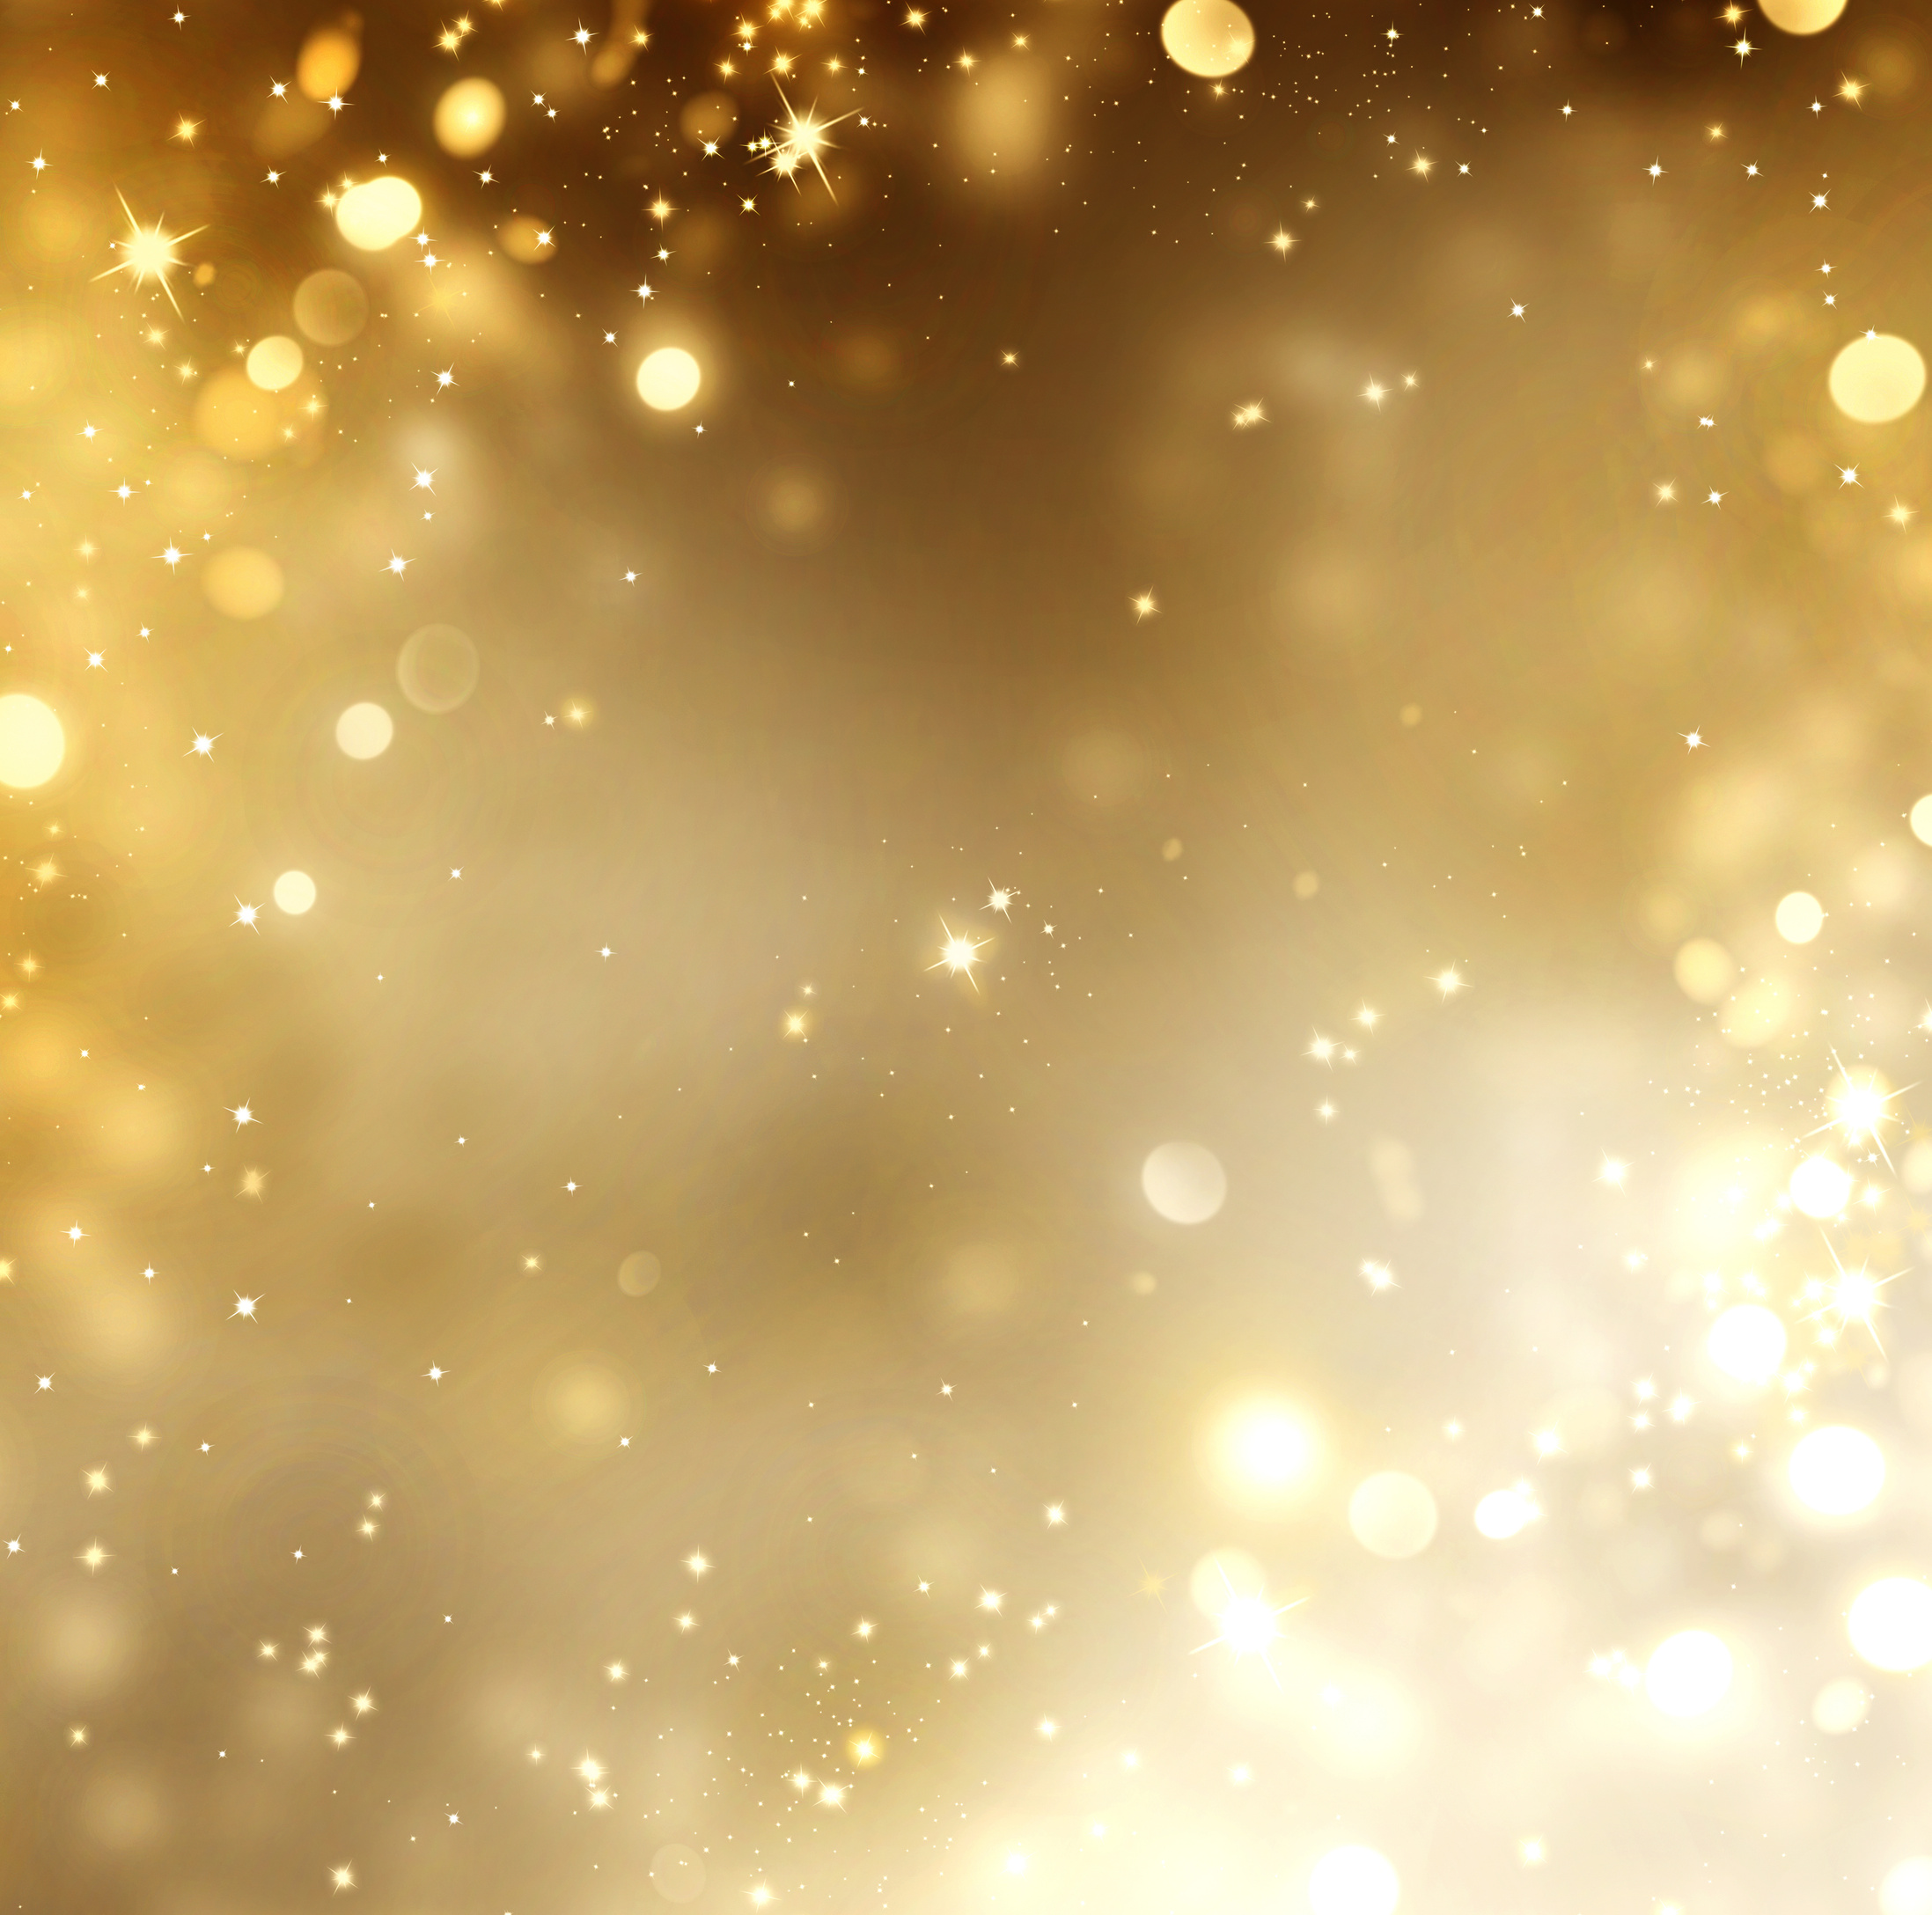 Christmas Gold Background. Golden Holiday Glowing Background